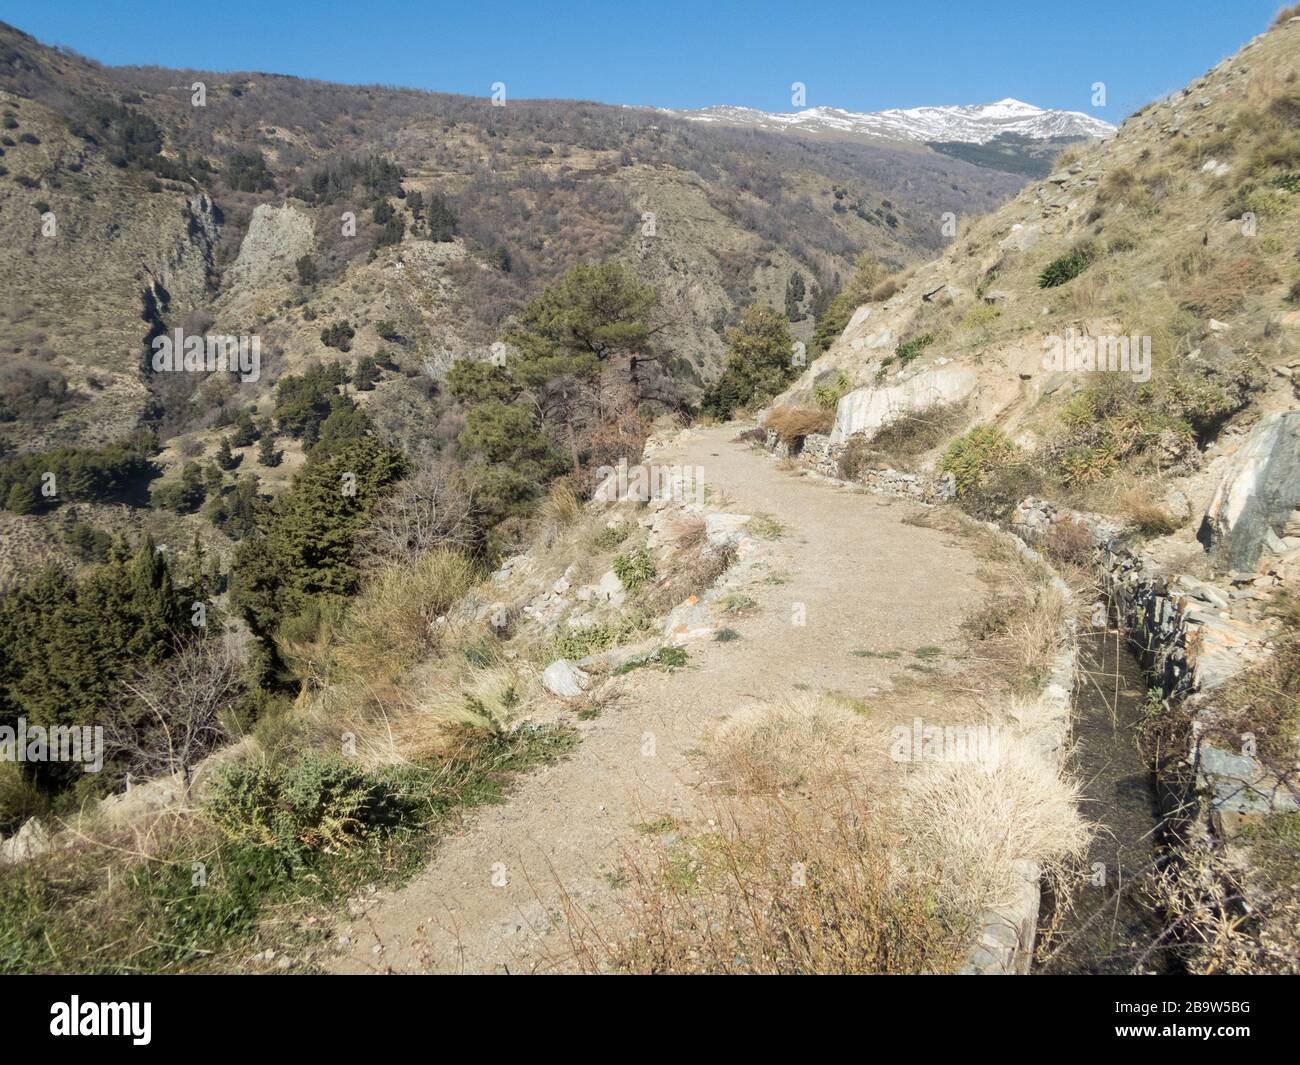 A path beside an acequia irrigation channel, Sierra Nevada mountains near Soportujar, Alpujarra valley, Andalusia, Spain Stock Photo